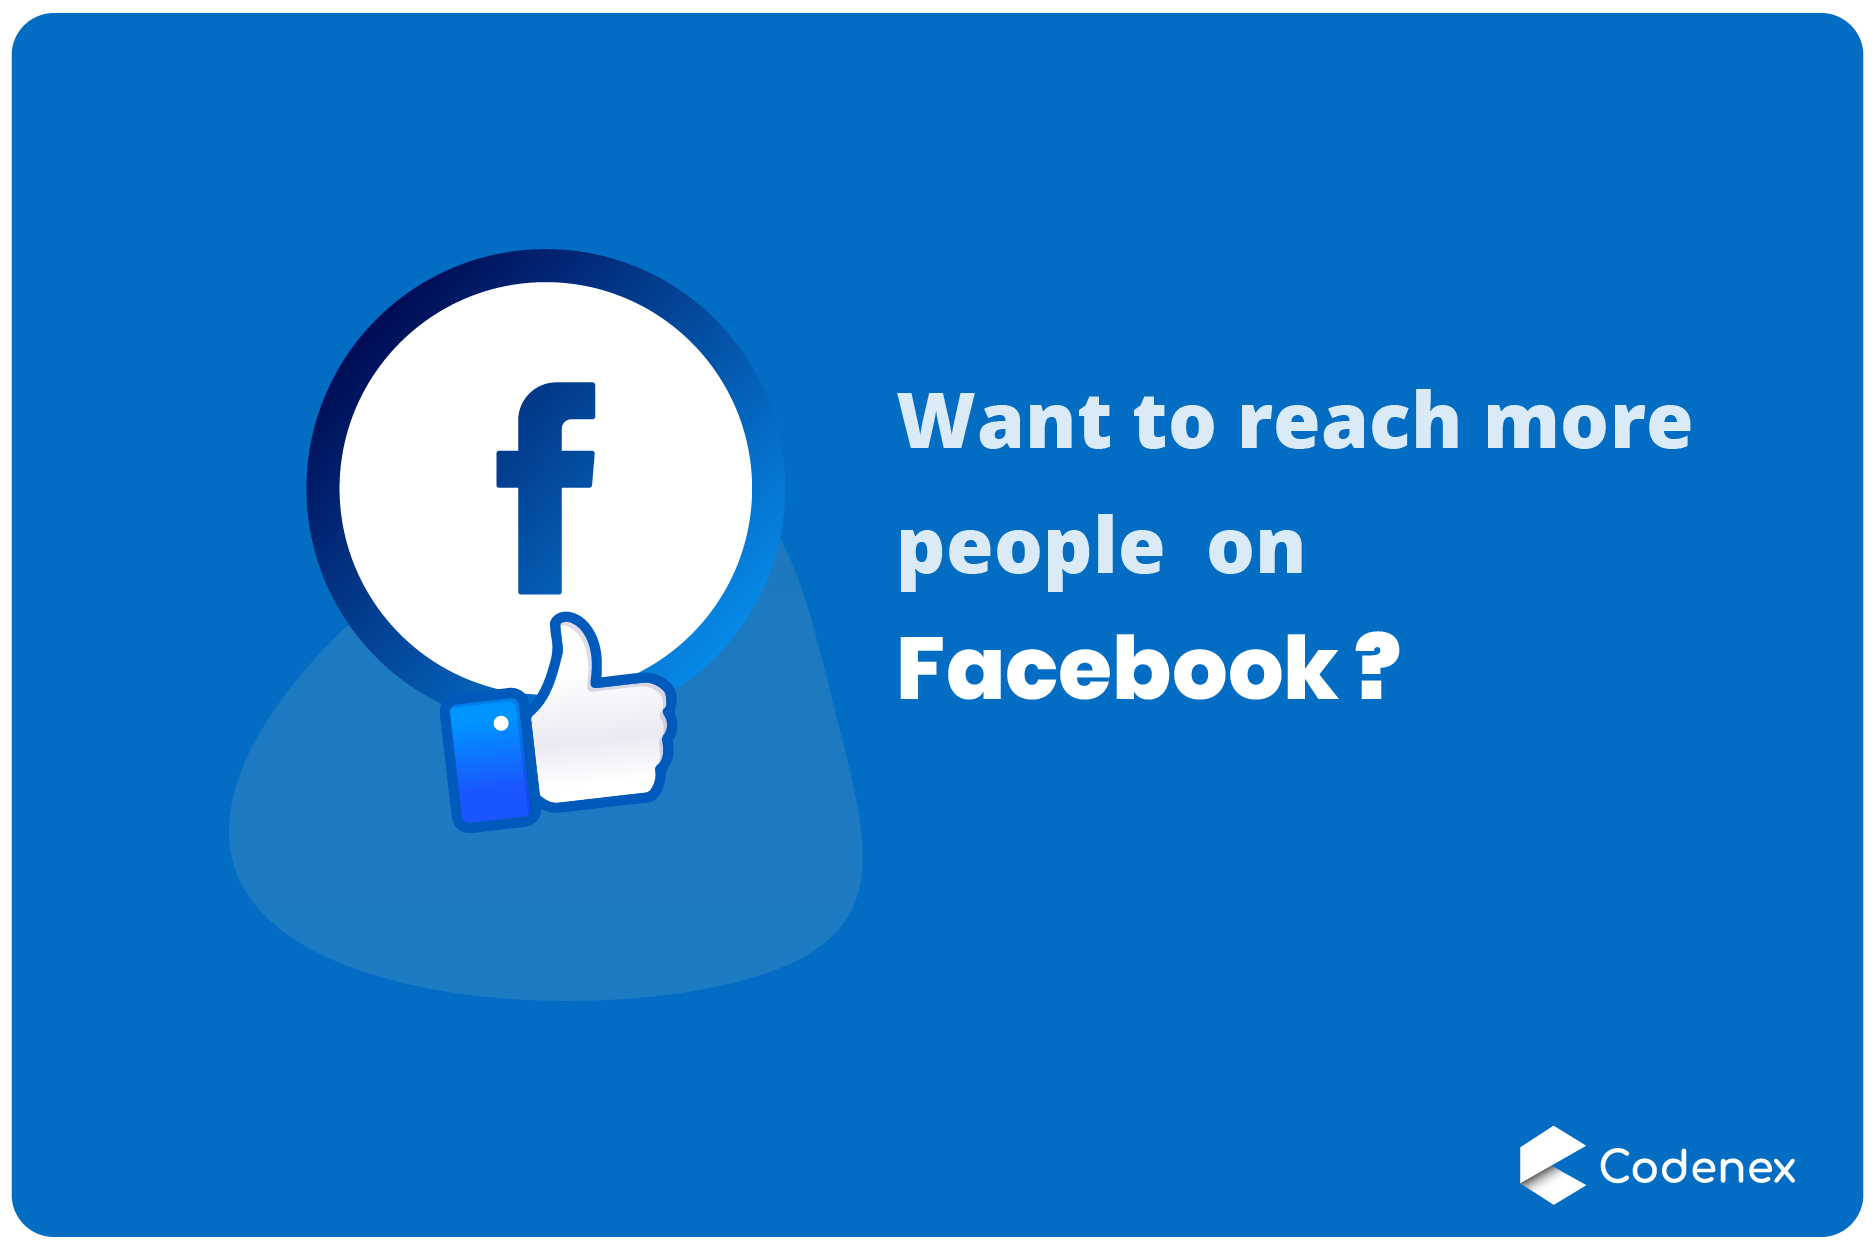 Want to reach more people on Facebook?